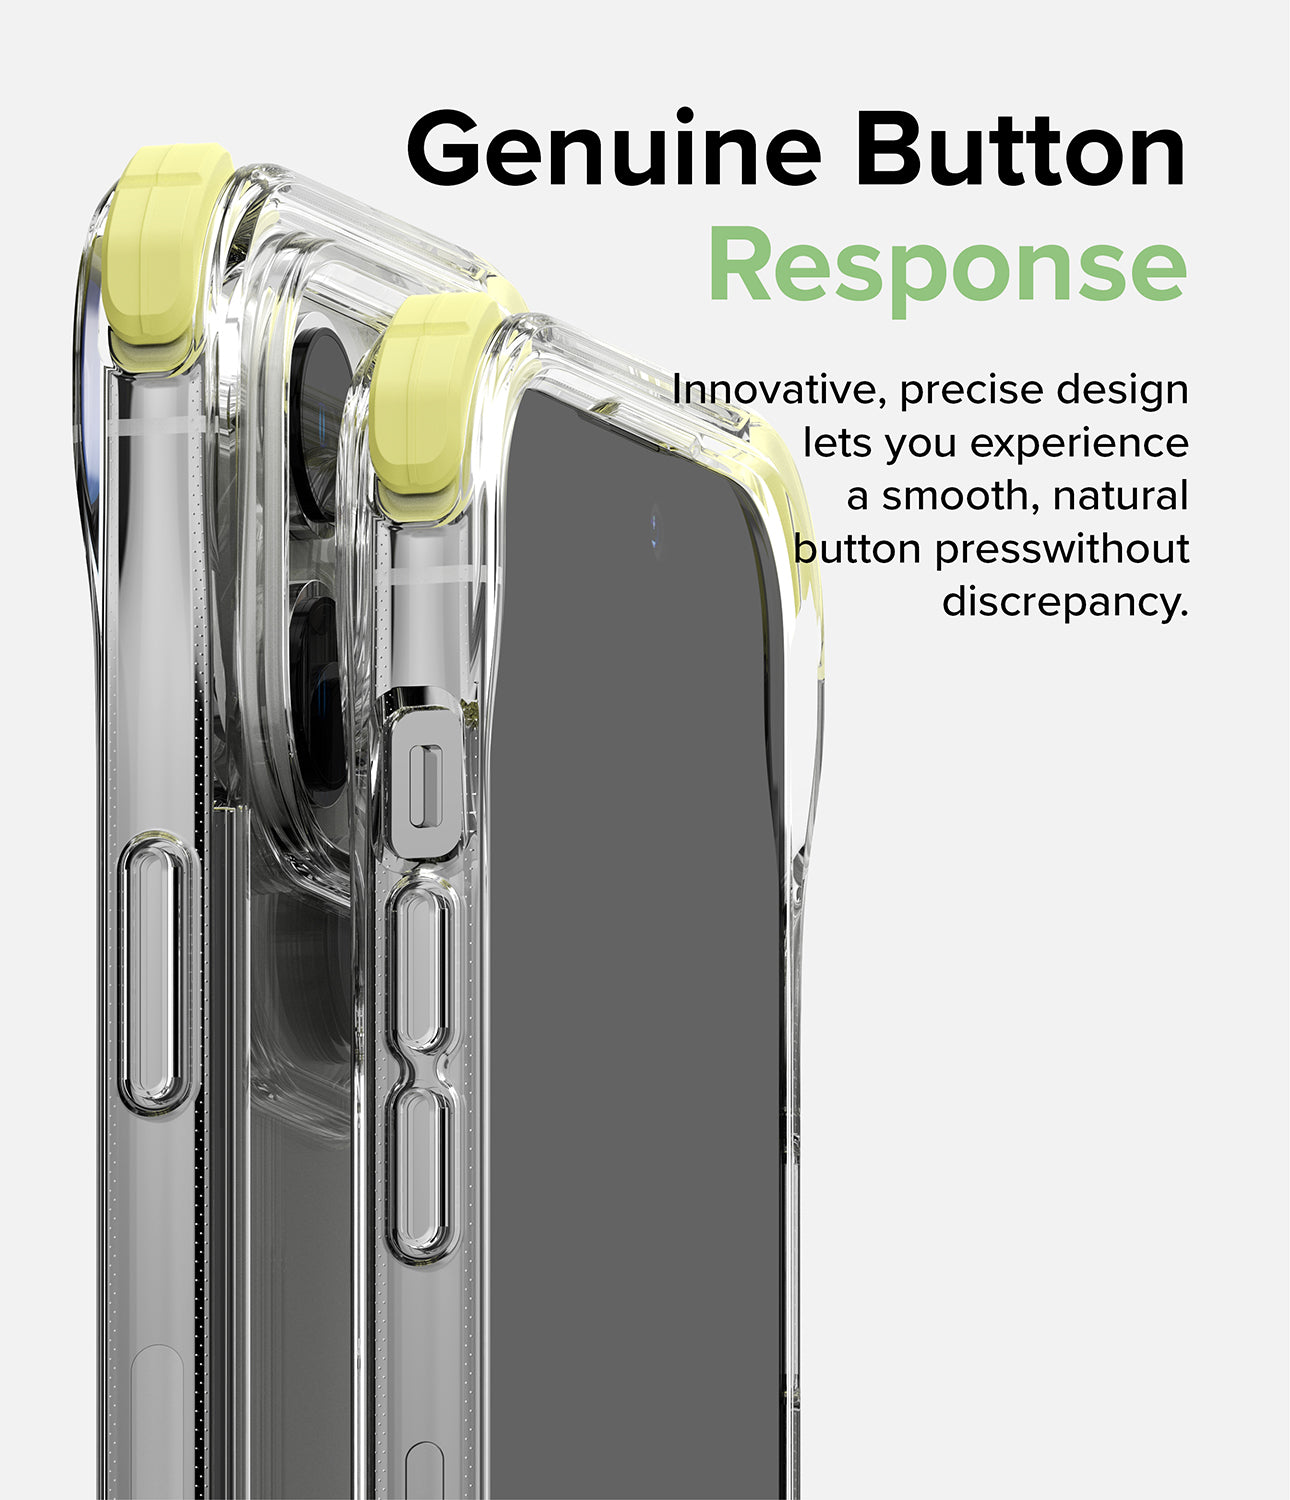 Genuine Button Response - Innovative, precise design lets you experience a smooth, natural button press without discrepancy.